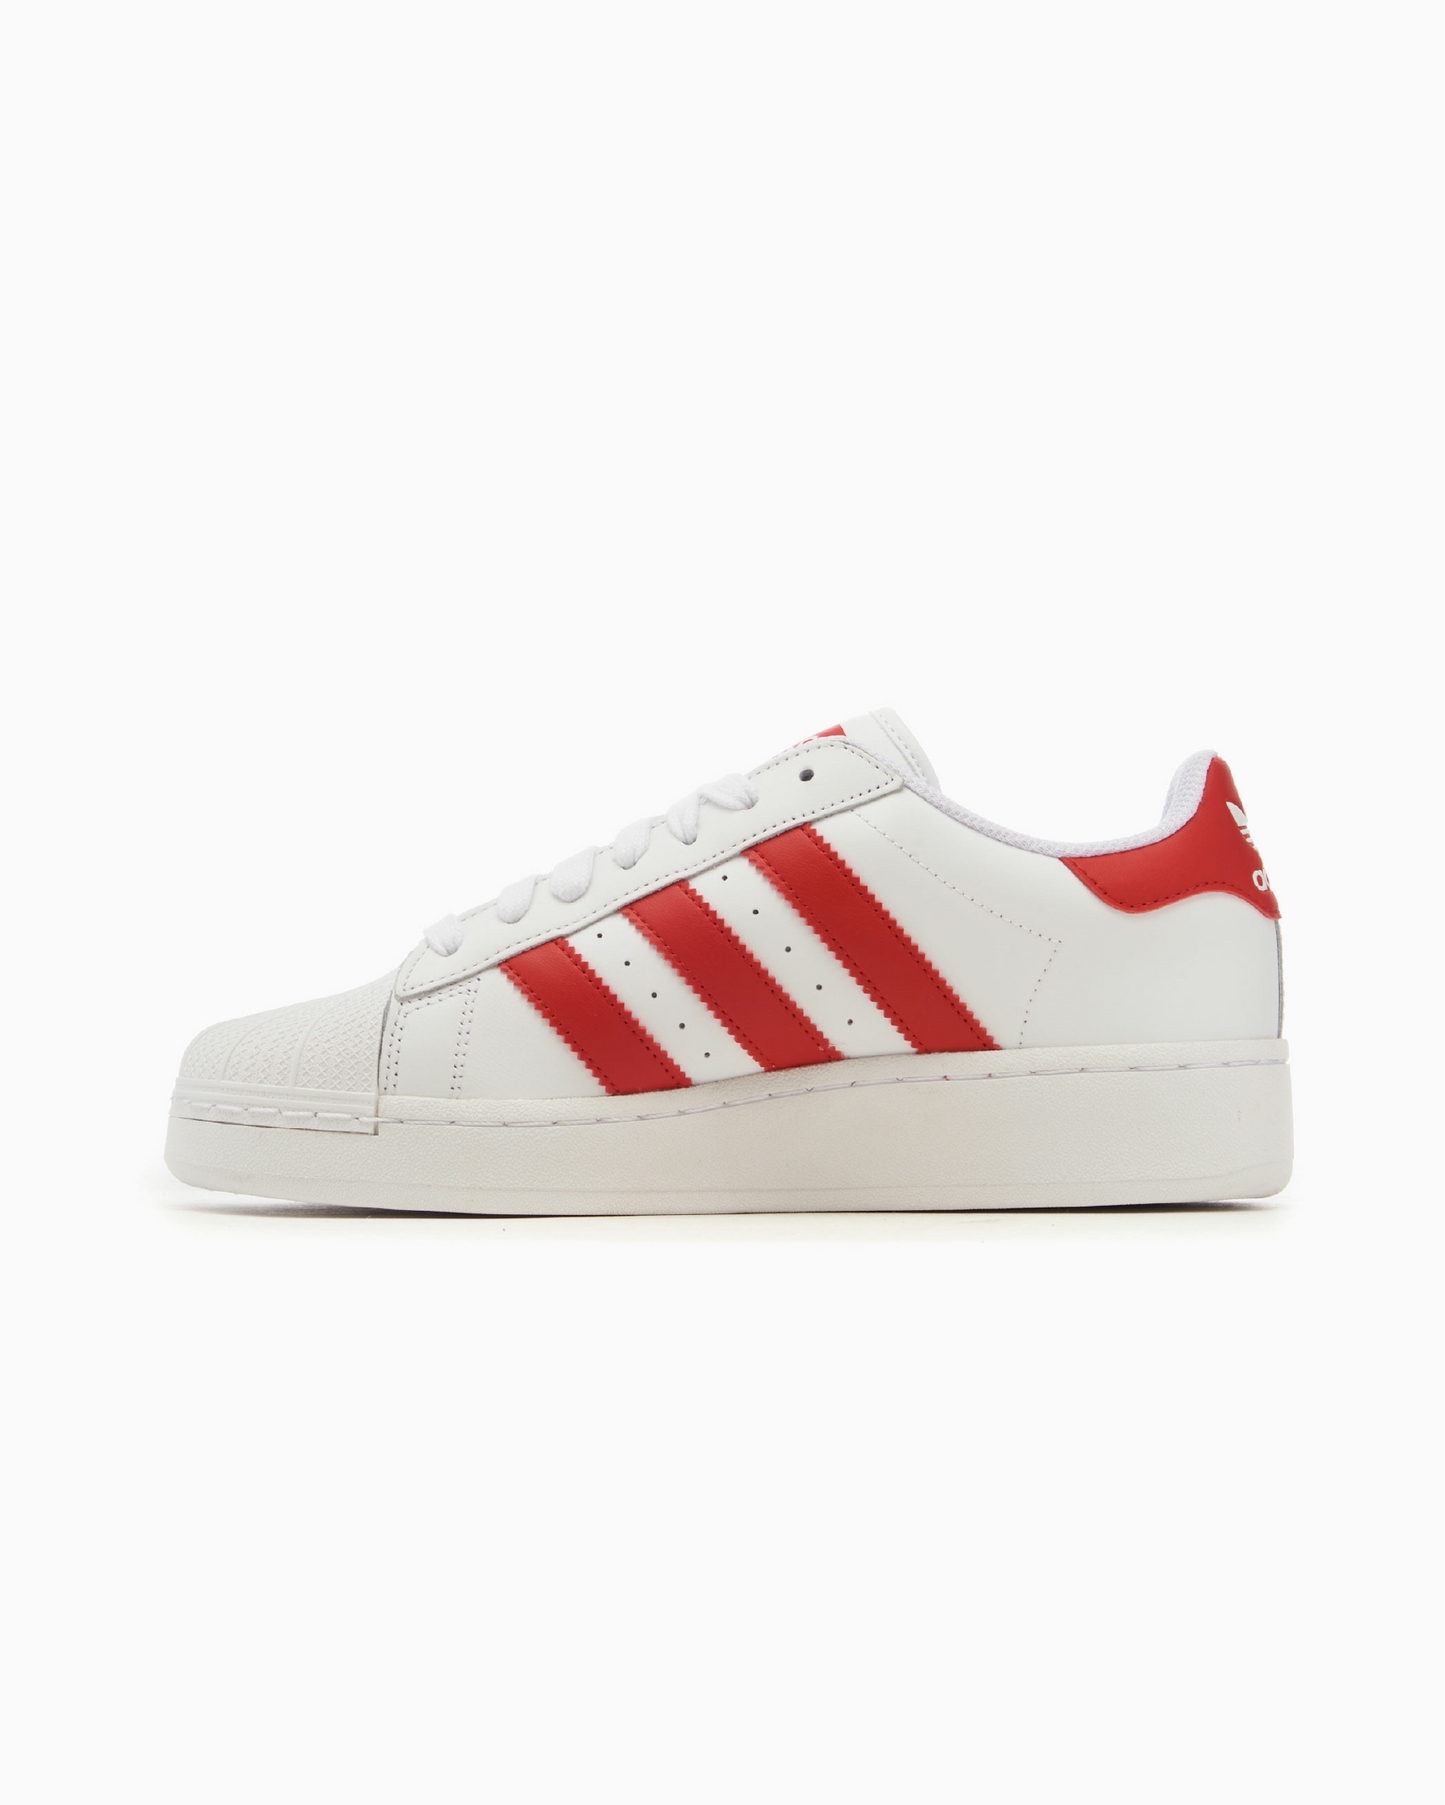 ADIDAS SUPER STAR XLG - WHITE/ RED